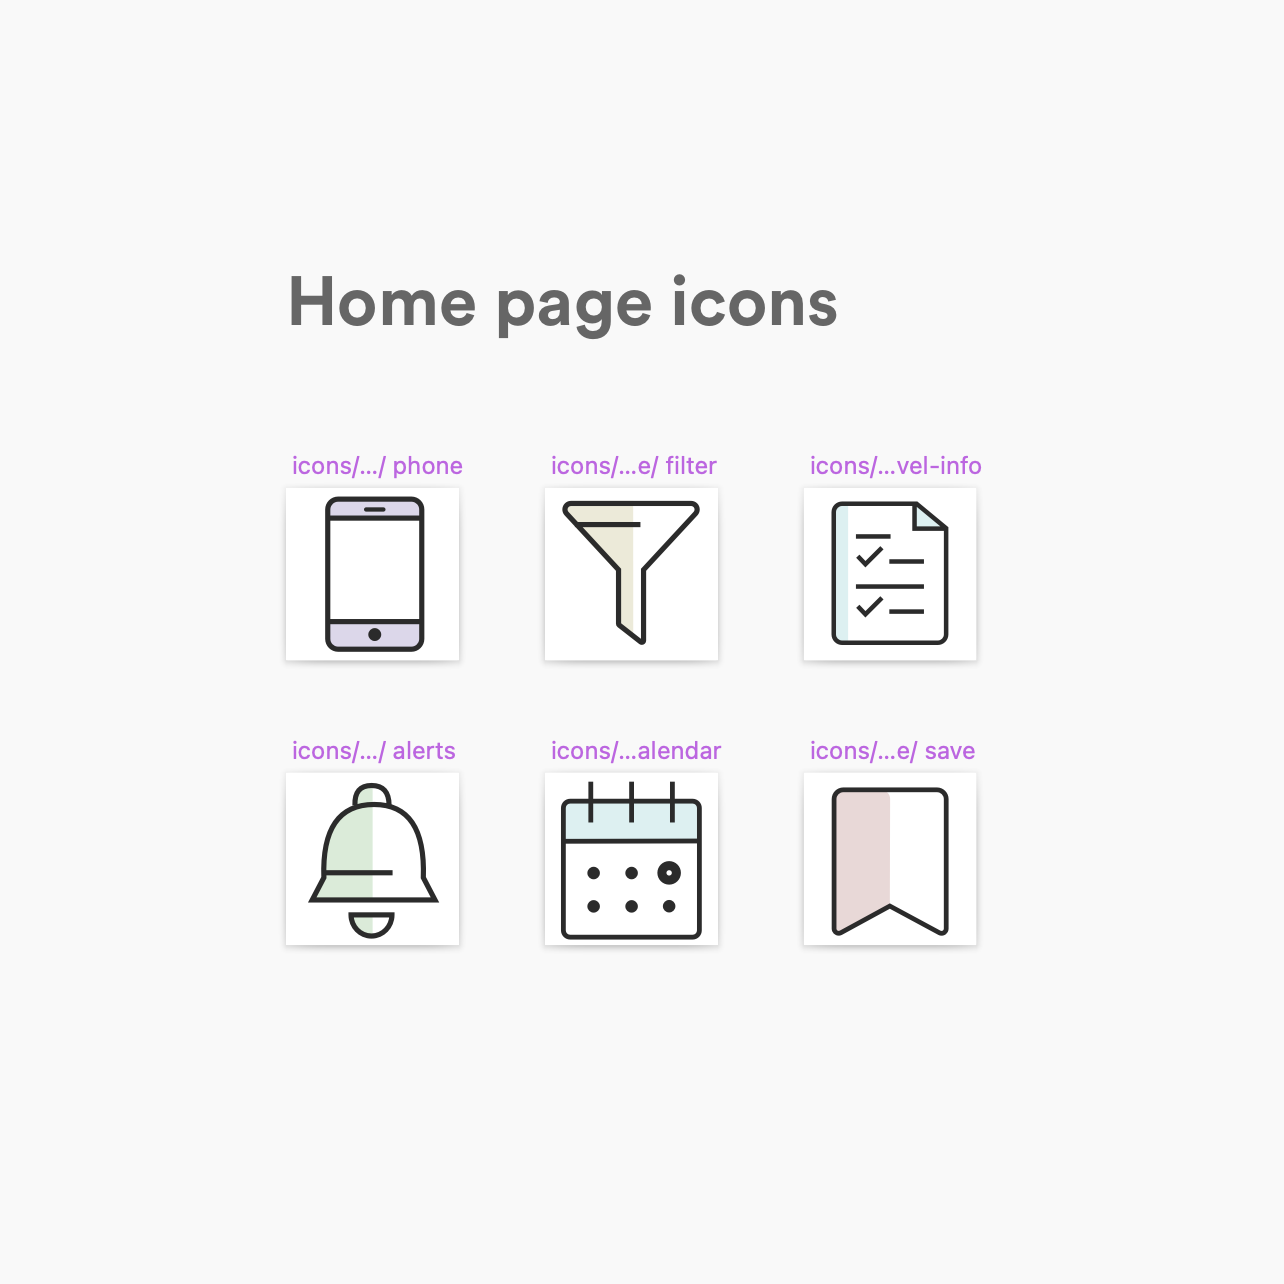 New homepage icons